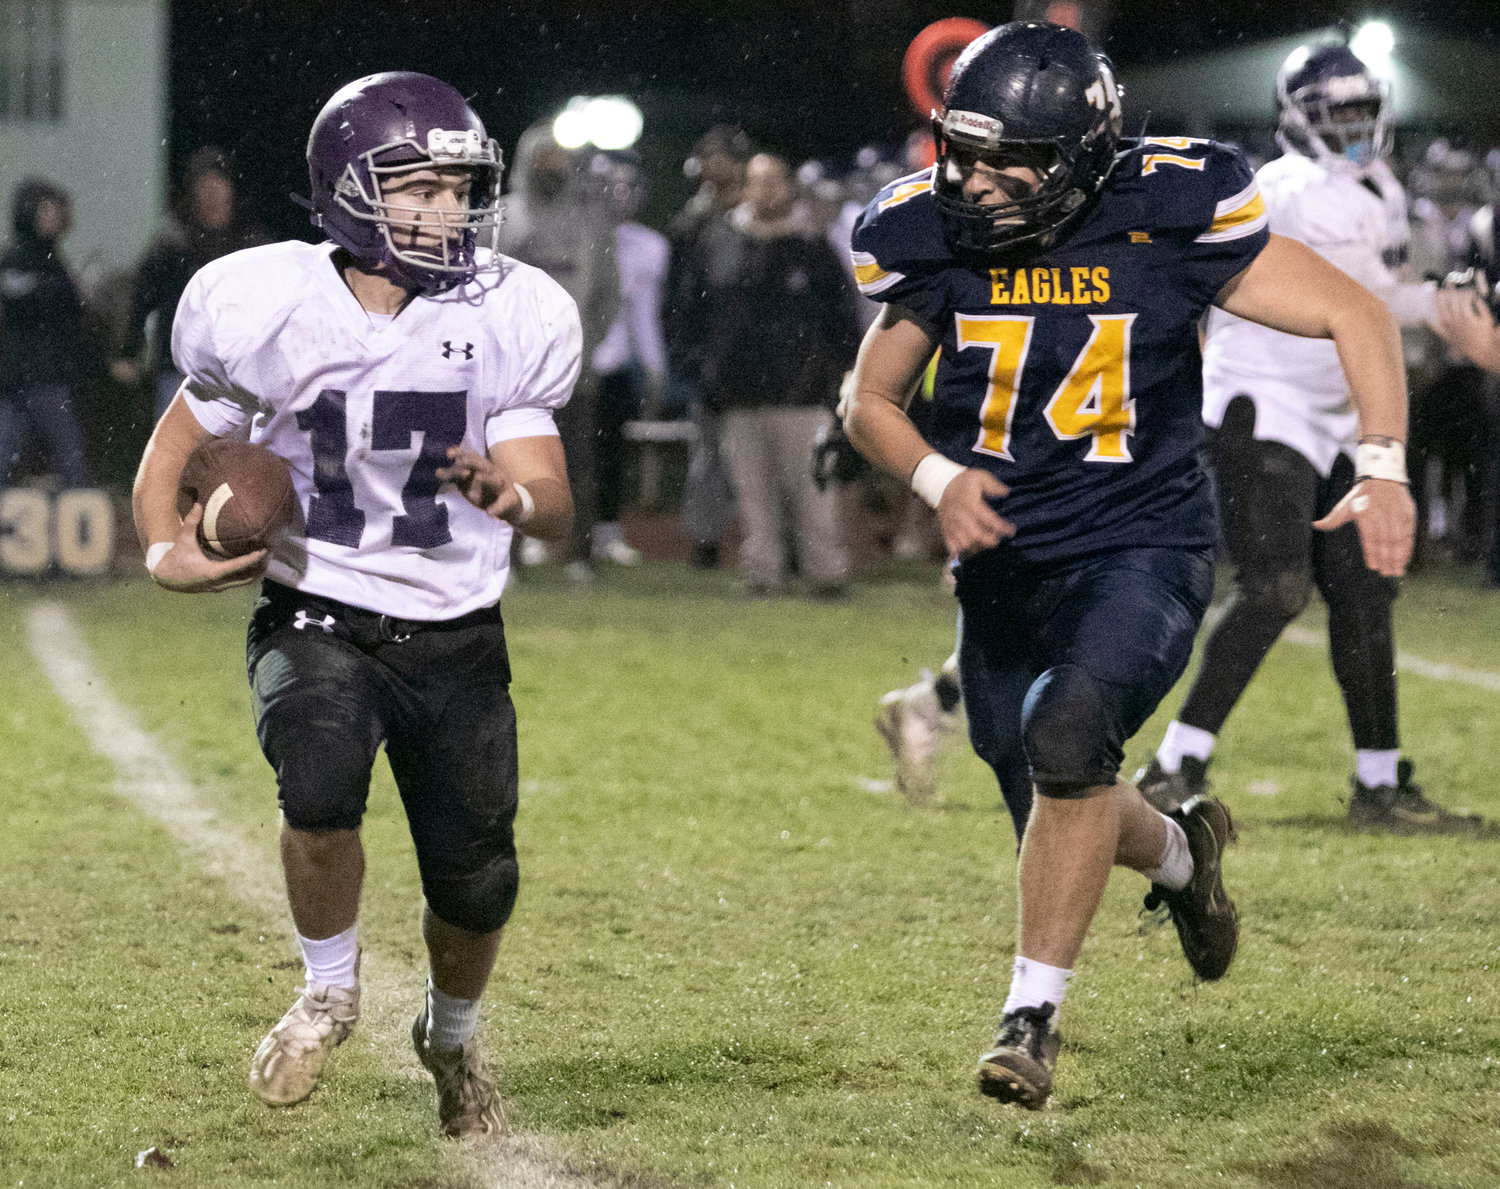 Huskies running back Riley Howland attempts to get around the end but is run down by Eagles lineman Jake Zimmerman.